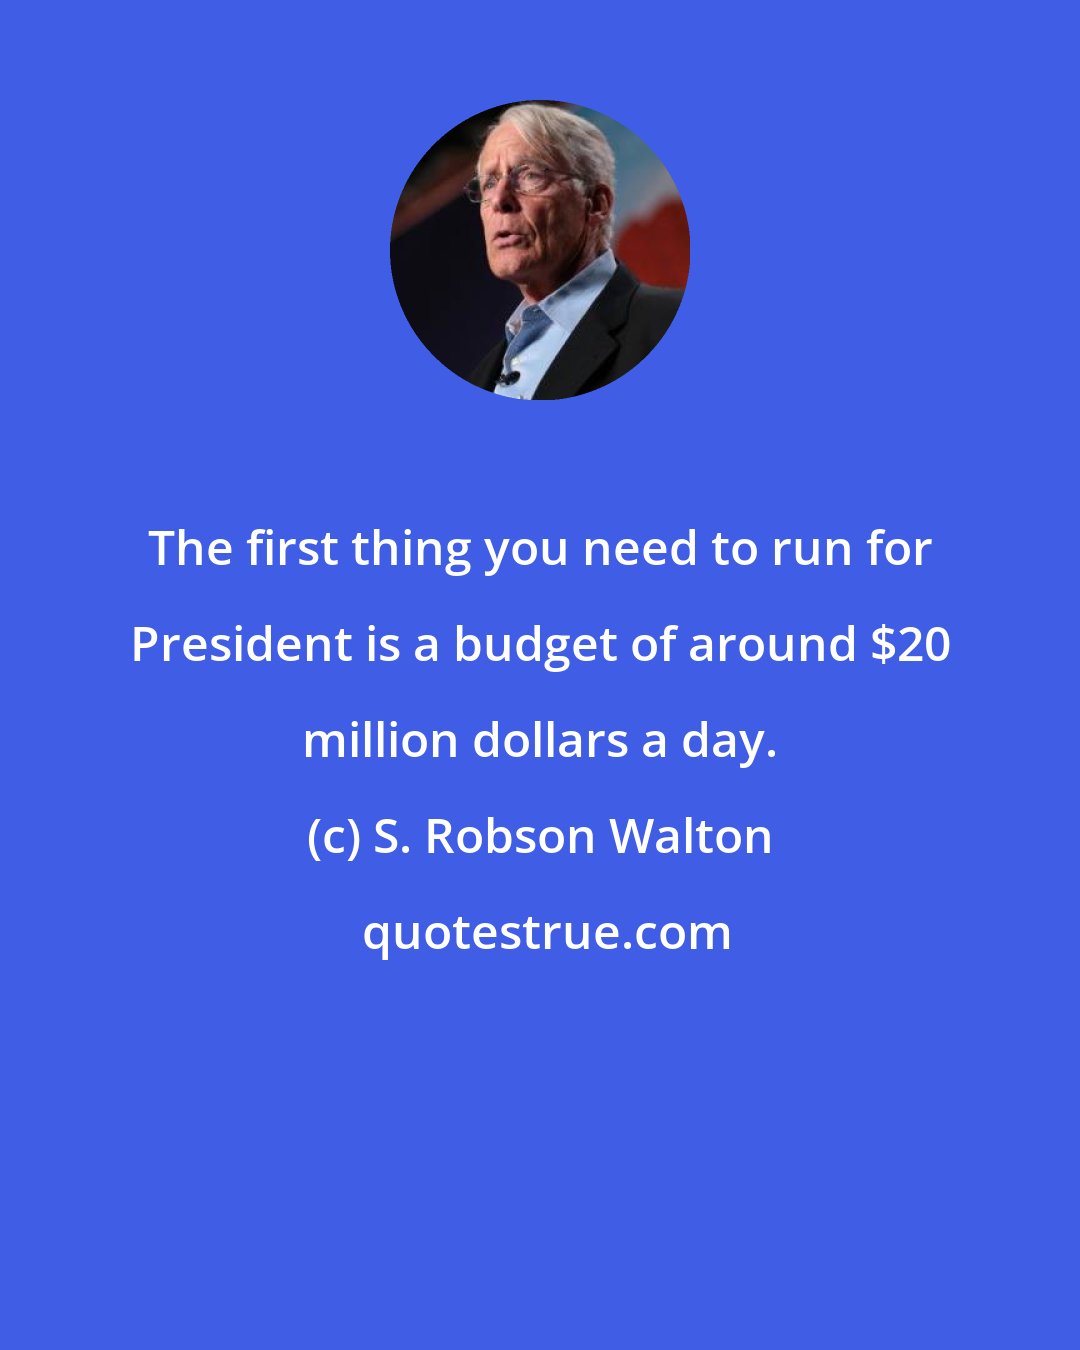 S. Robson Walton: The first thing you need to run for President is a budget of around $20 million dollars a day.